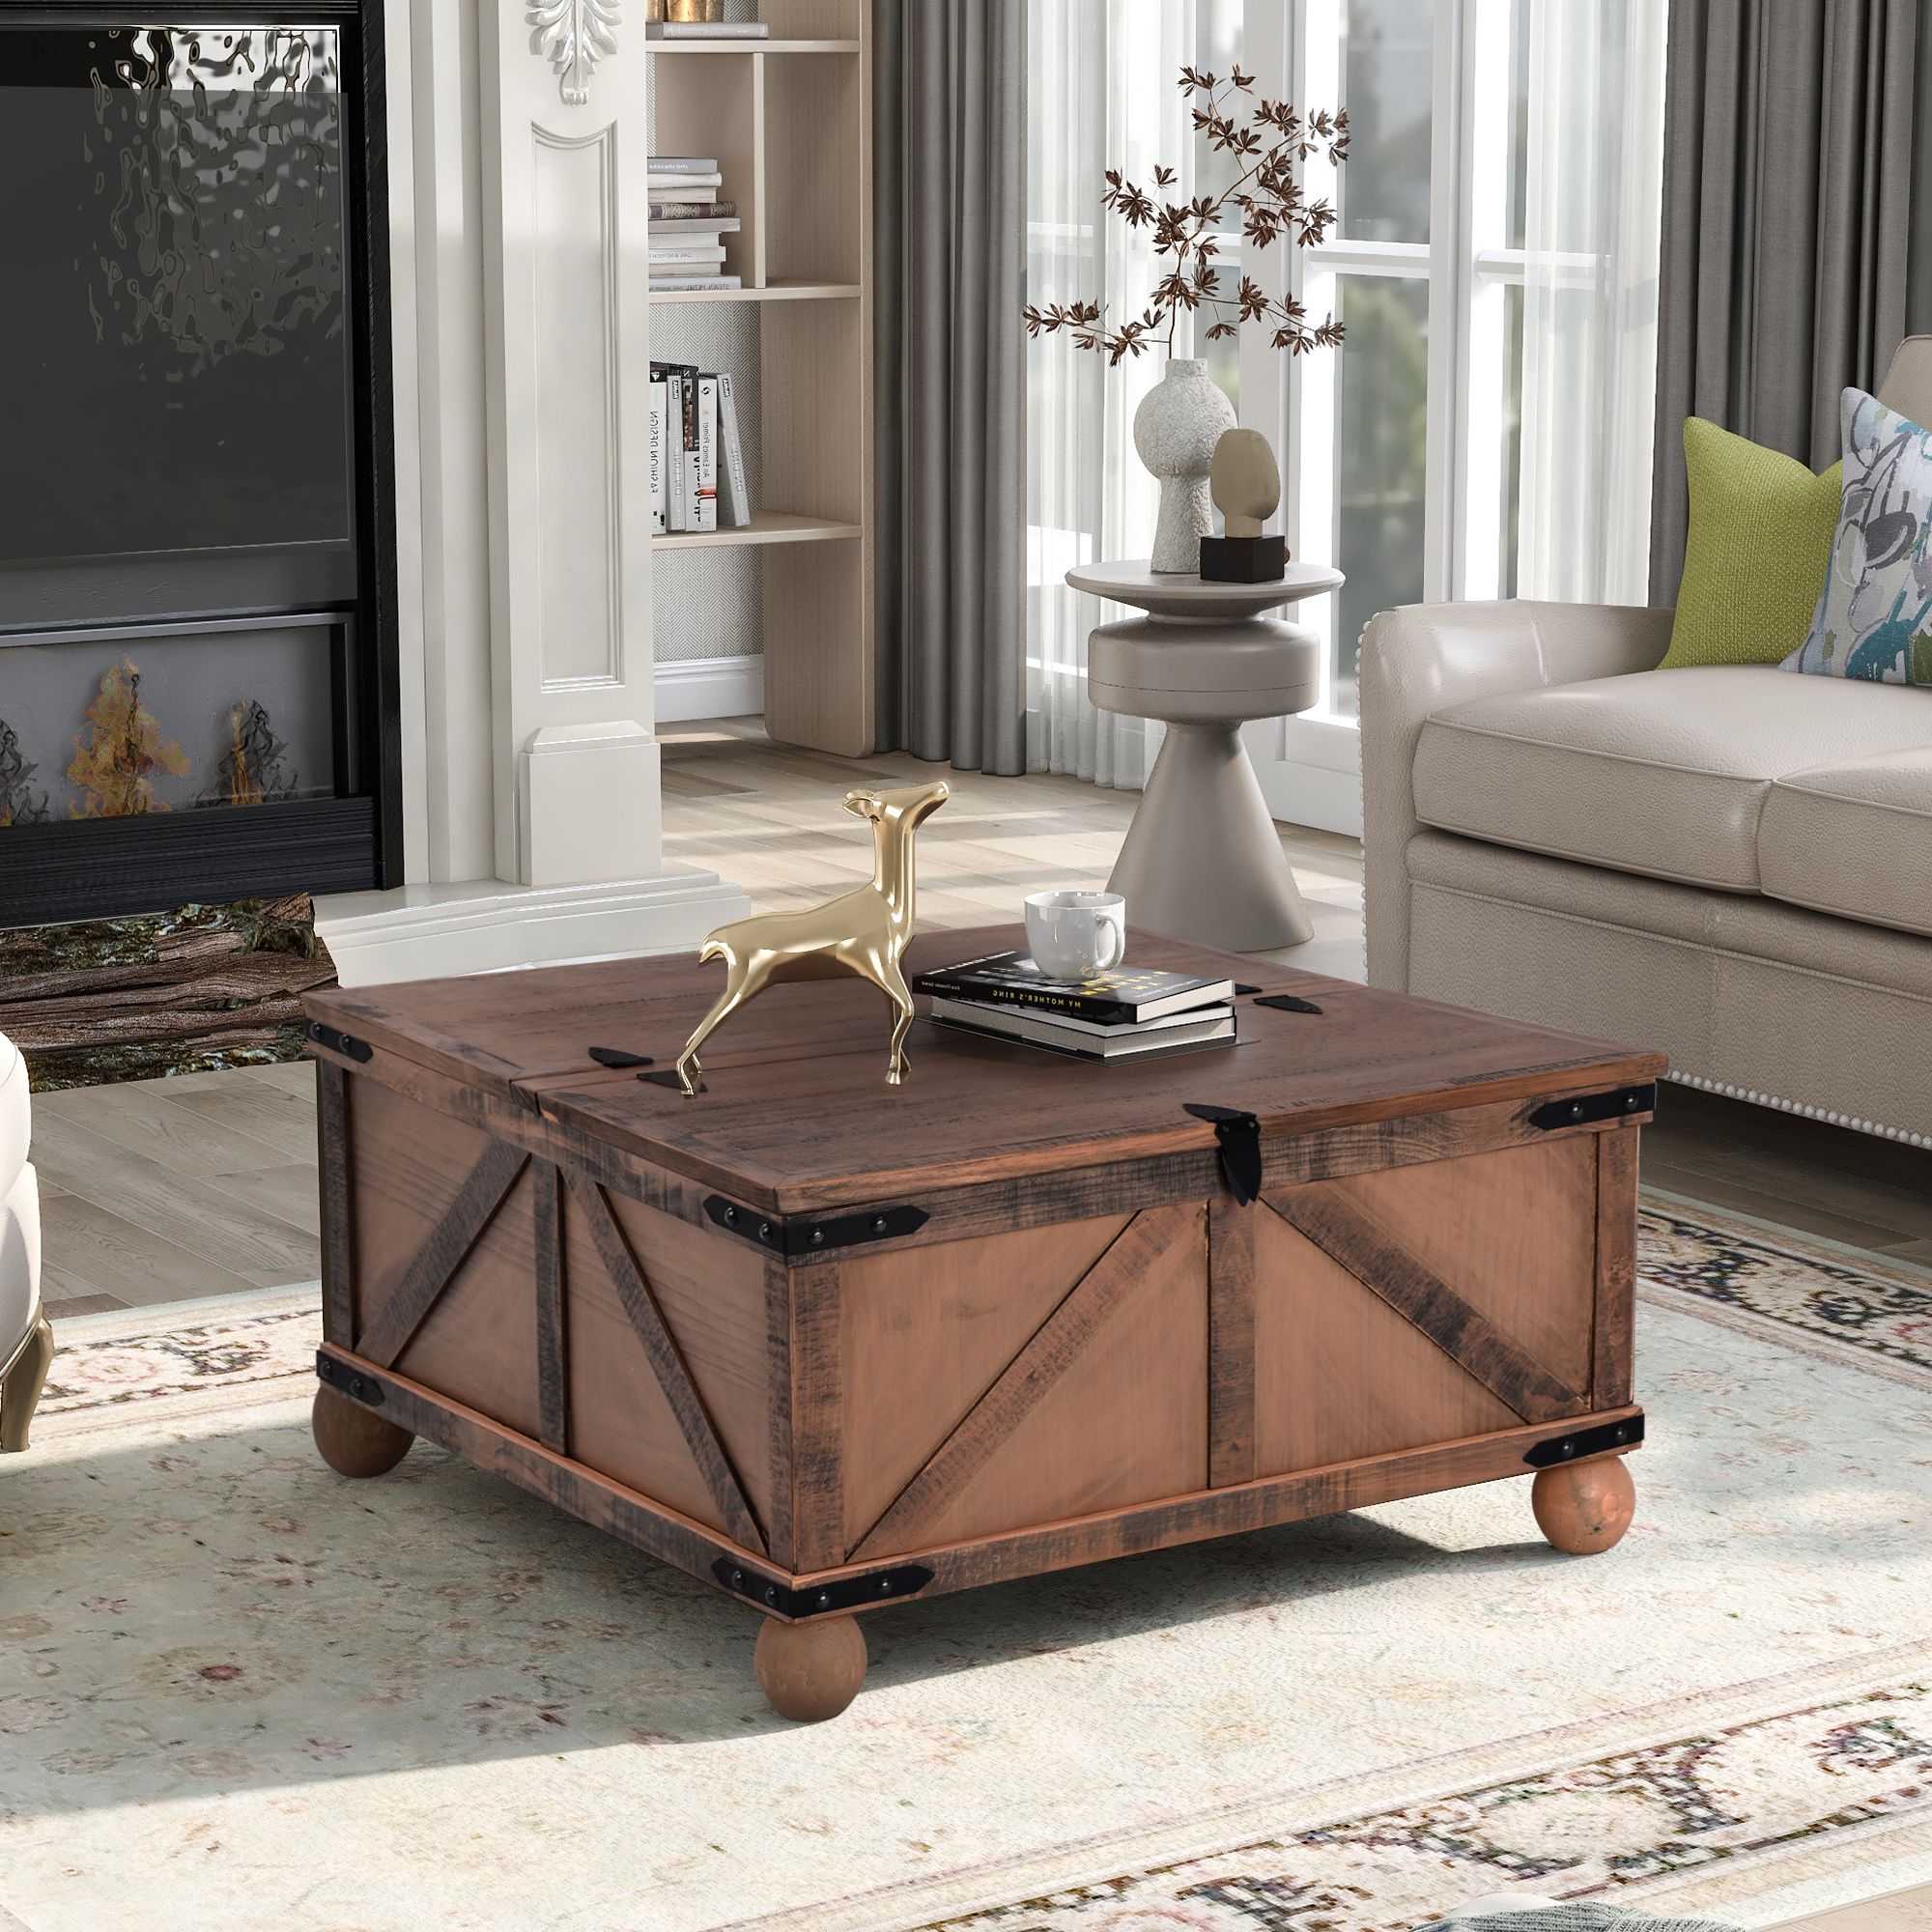 Recent 1 Shelf Square Coffee Tables Regarding Farmhouse Square Coffee Table With Lift Top For Storage, Multiple (View 10 of 10)